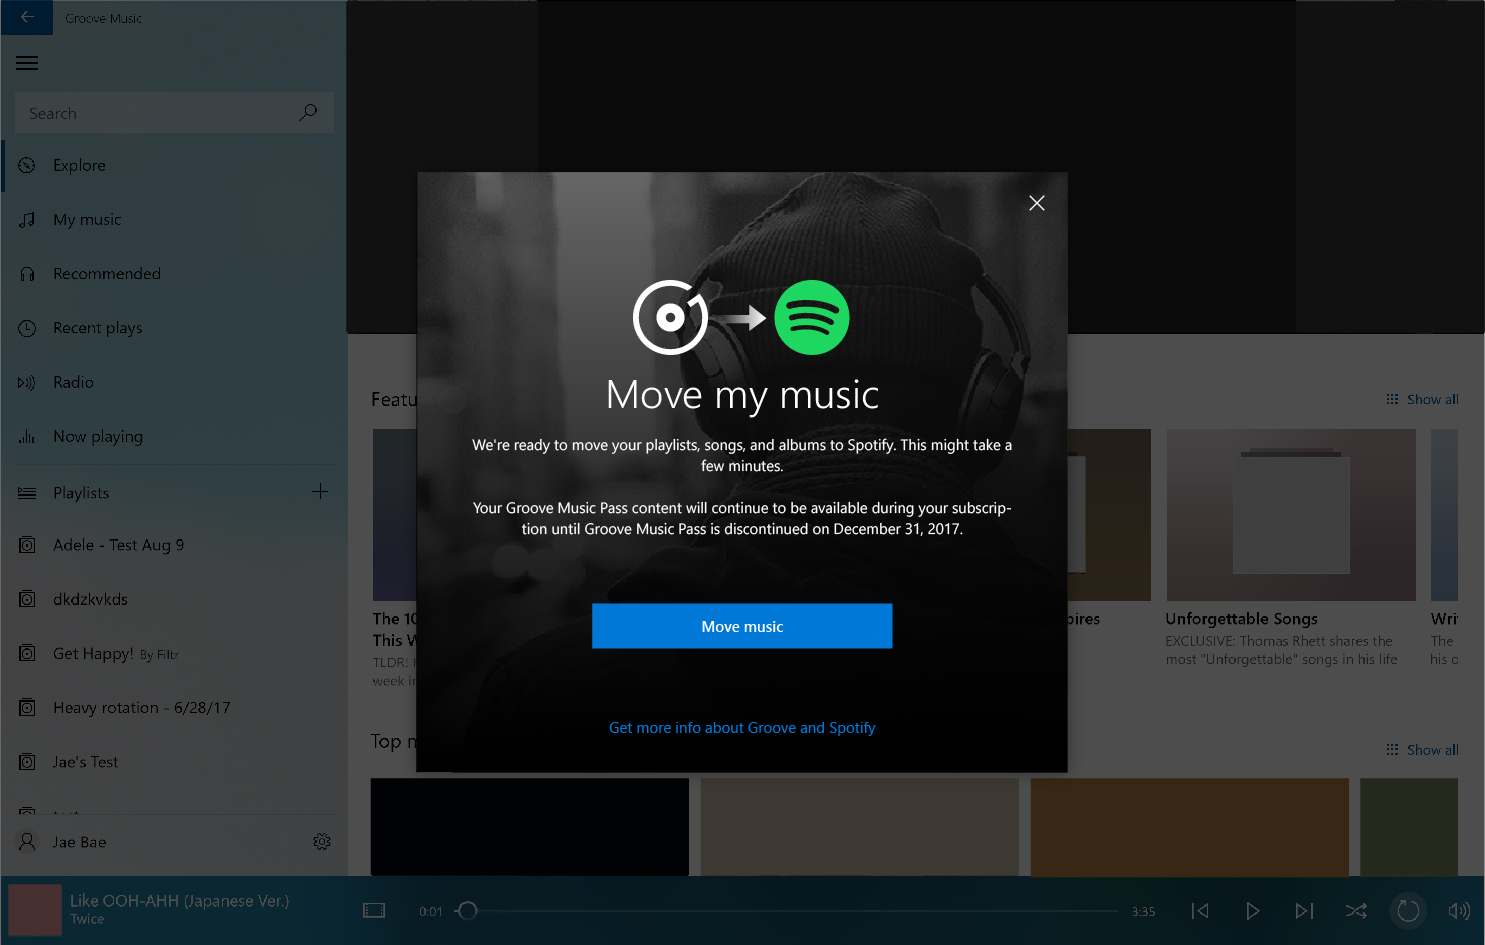 cannot download spotify on microsoft store 8e2a039485d9789f8aabf55a8a768205.jpg